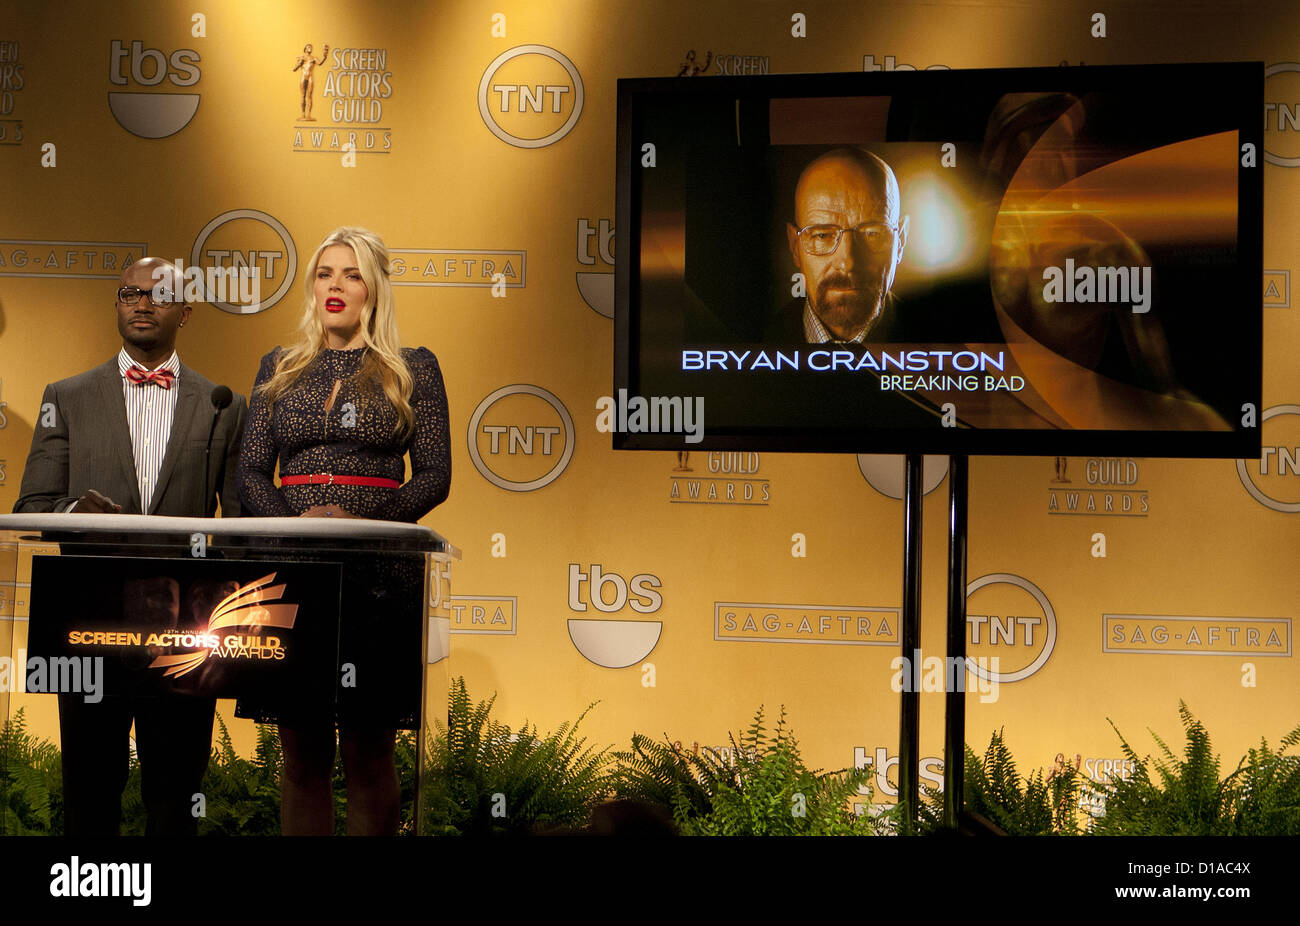 Dec. 12, 2012 - West Hollywood, California, U.S - Actors Busy Philipps and Taye Diggs at the 19th Annual Screen Actors Guild Awards Nominations Announcement at the Pacific Design Center on Wednesday, December 12, 2012 in West Hollywood, California. Bryan Cranston, ''Breaking Bad'', is nominated for Outstanding Performance by a Male Actor in a Drama Series. (Credit Image: © Javier Rojas/Prensa Internacional/ZUMAPRESS.com) Stock Photo